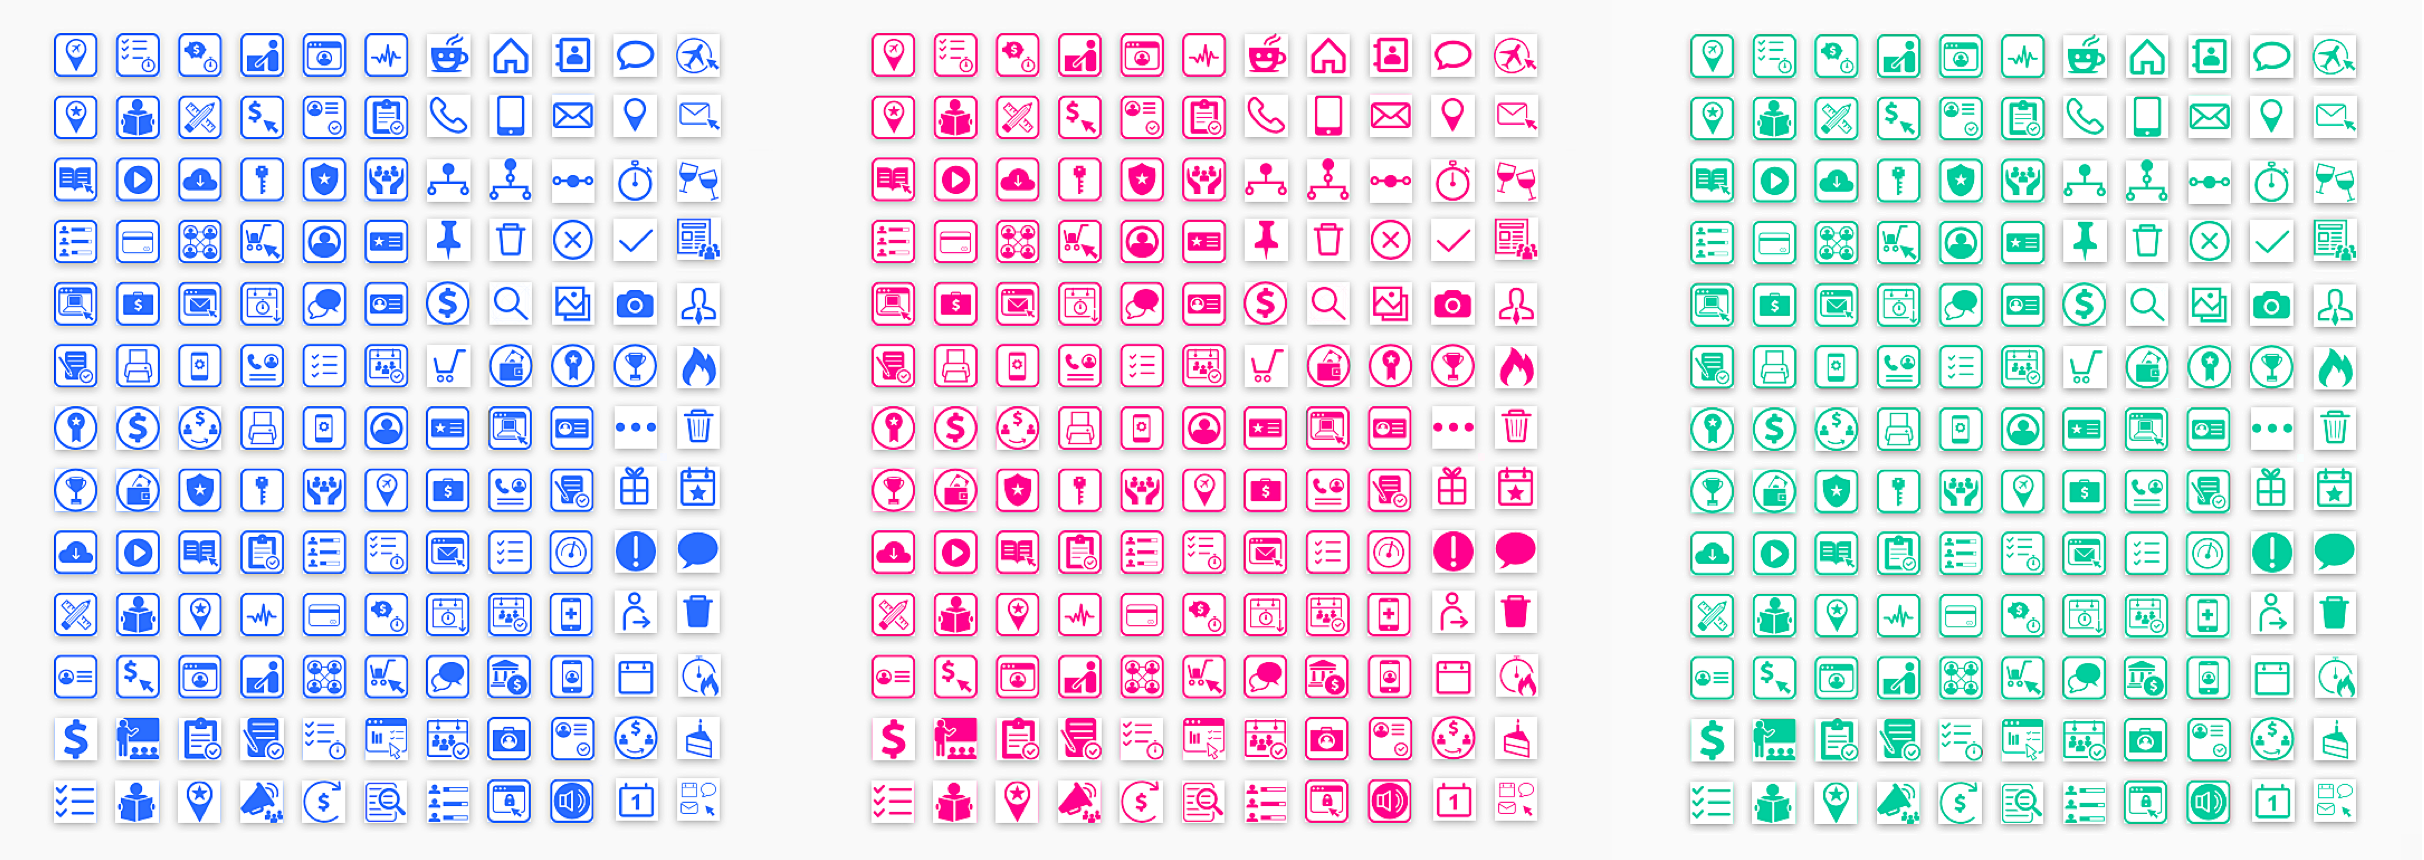 The full icon SVG set for the Espressive App, dynamically skinned in corporate brand colors